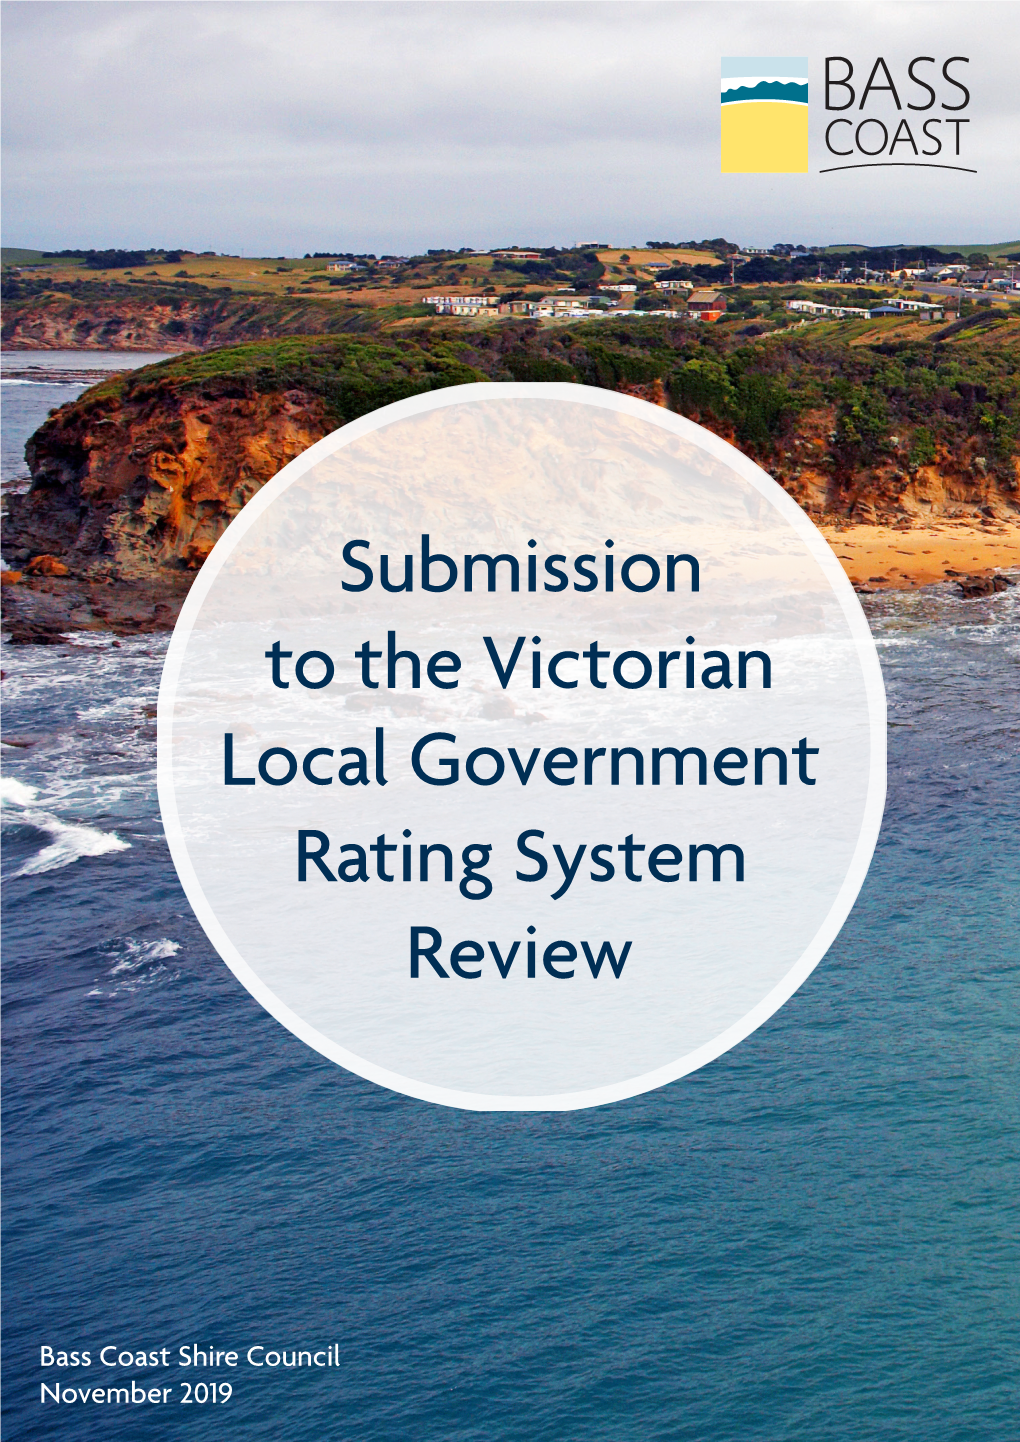 Bass Coast Shire Council Submission to Victorian LG Rating System Review